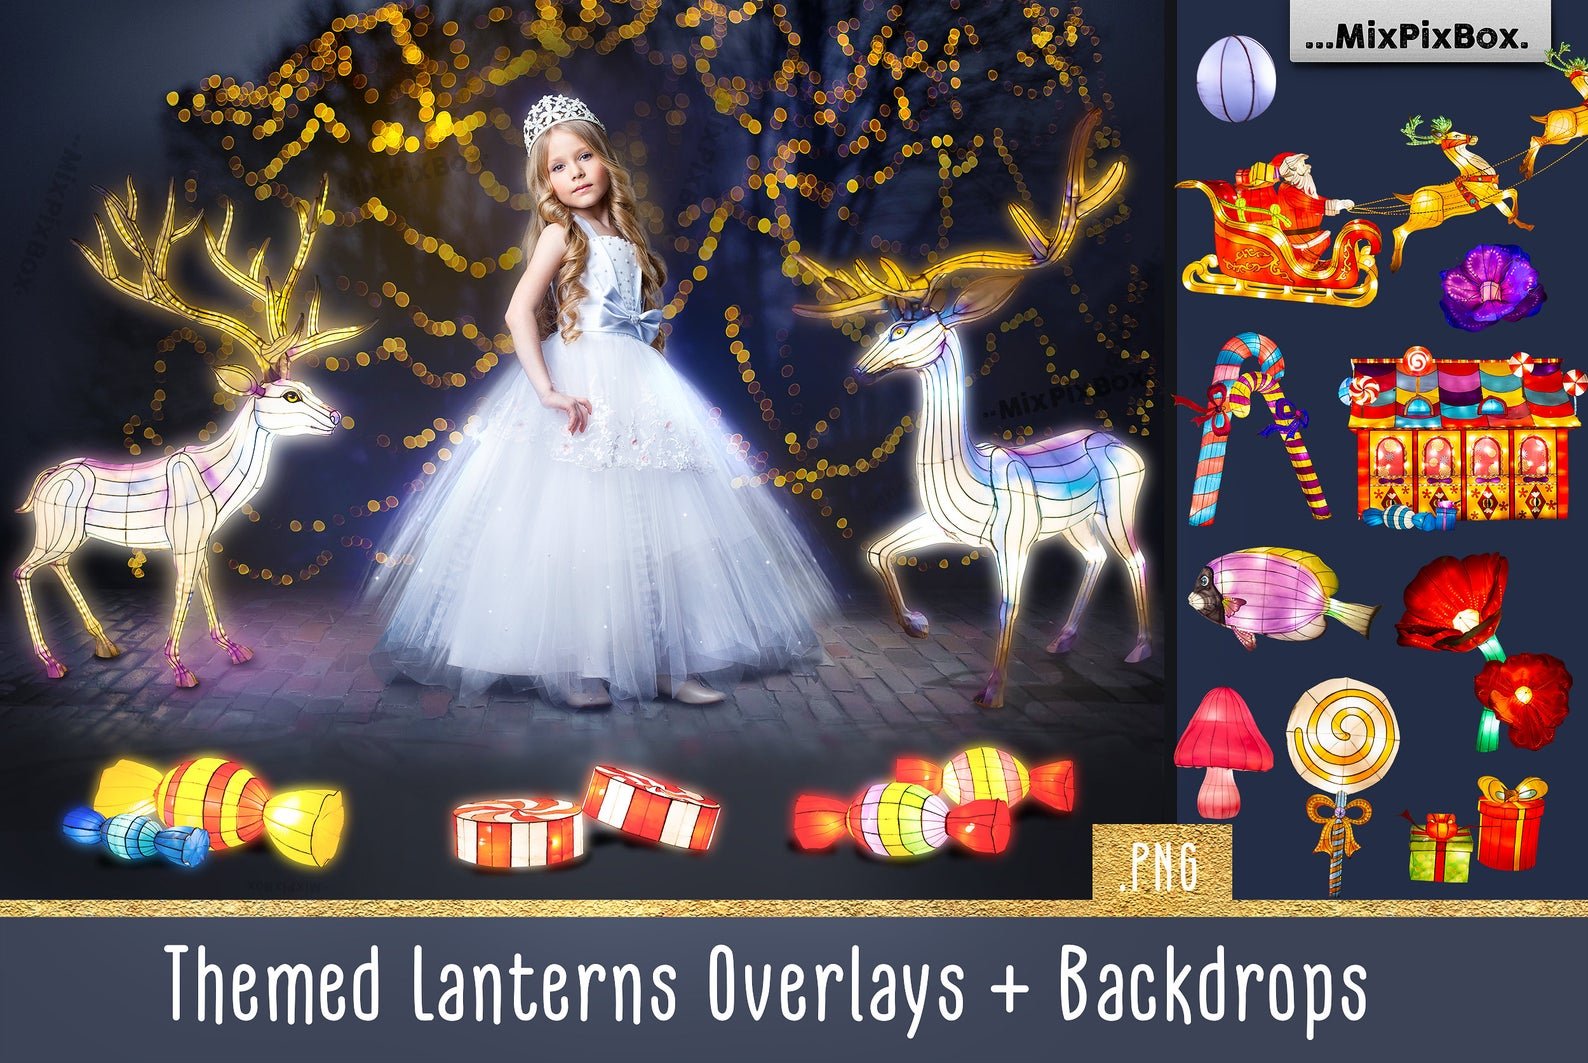 Themed Lantern Overlays and Backdropcover image.